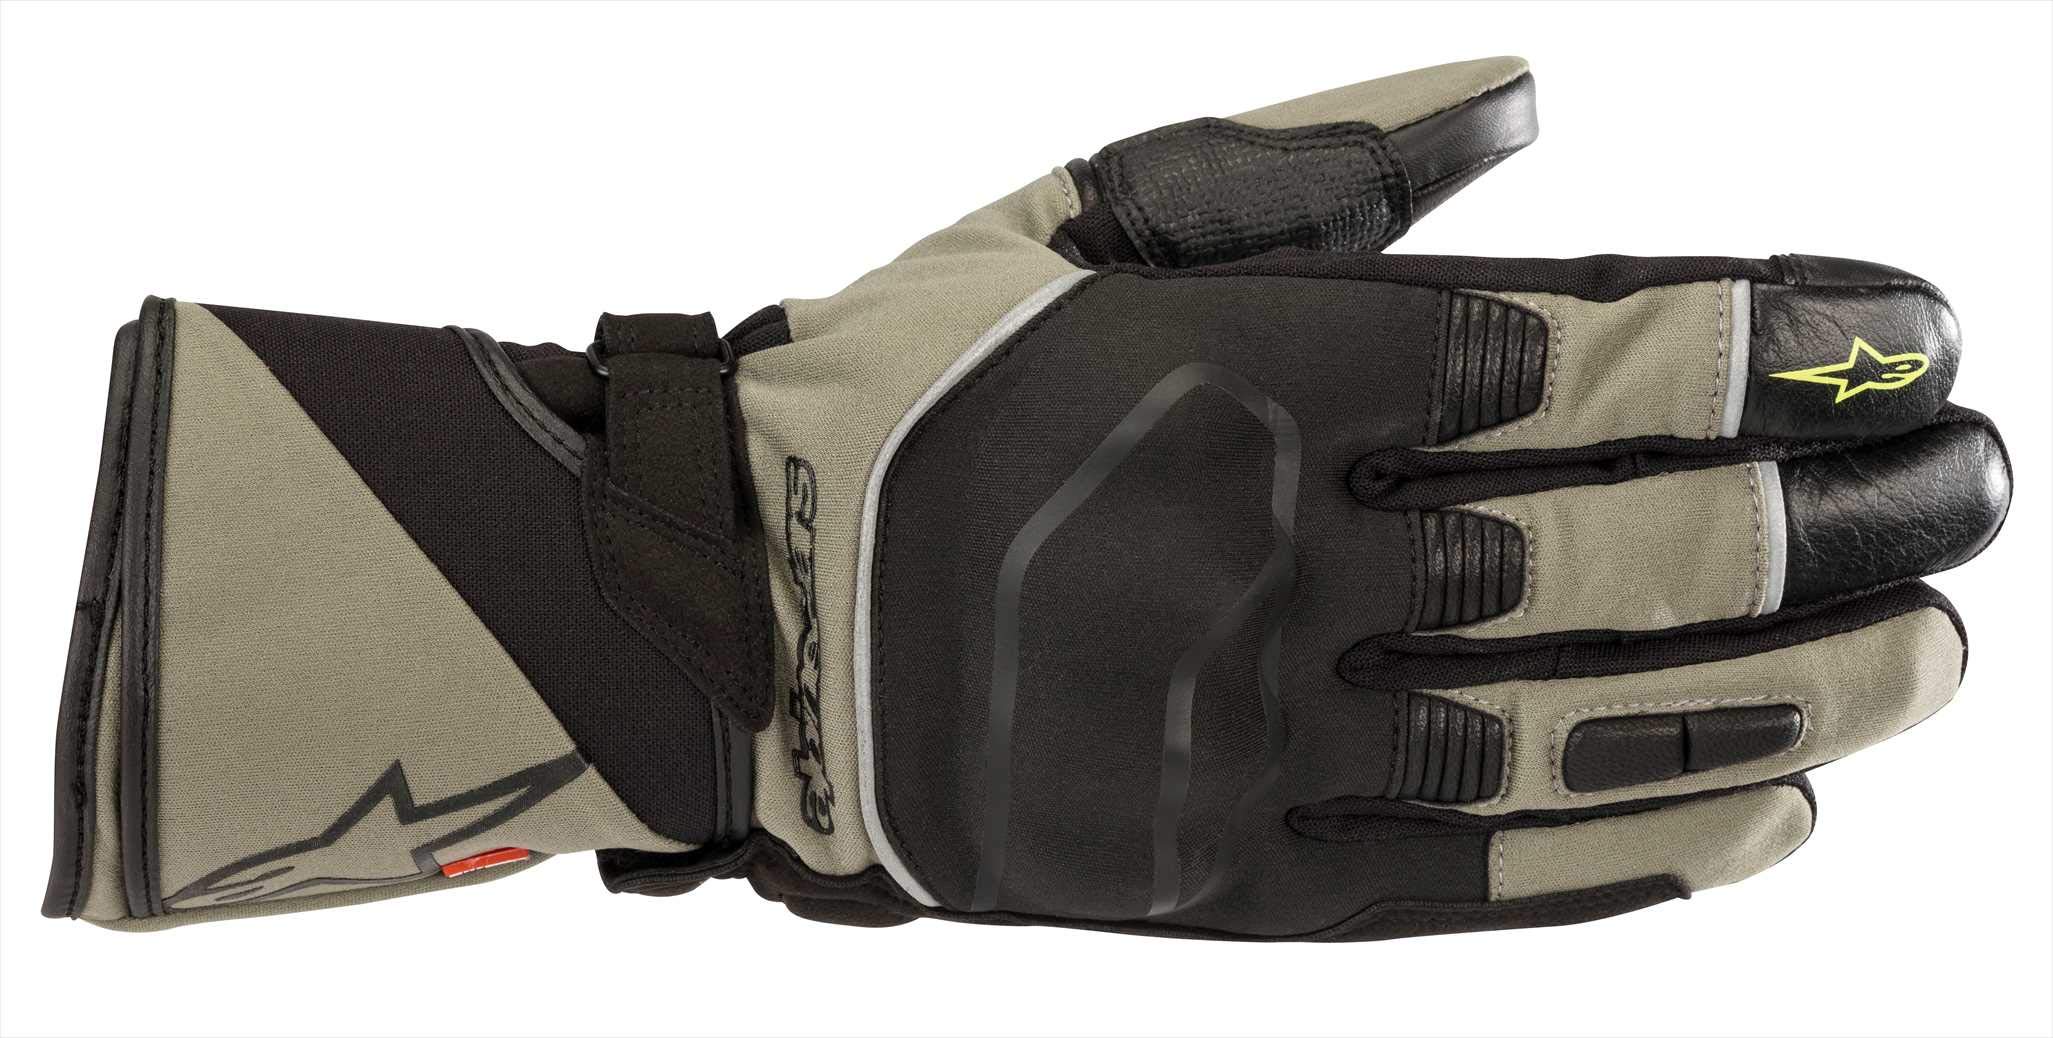 Alpinestars Men's Andes Touring Outdry Waterproof Motorcycle Riding Glove, Military Green/Black, Small